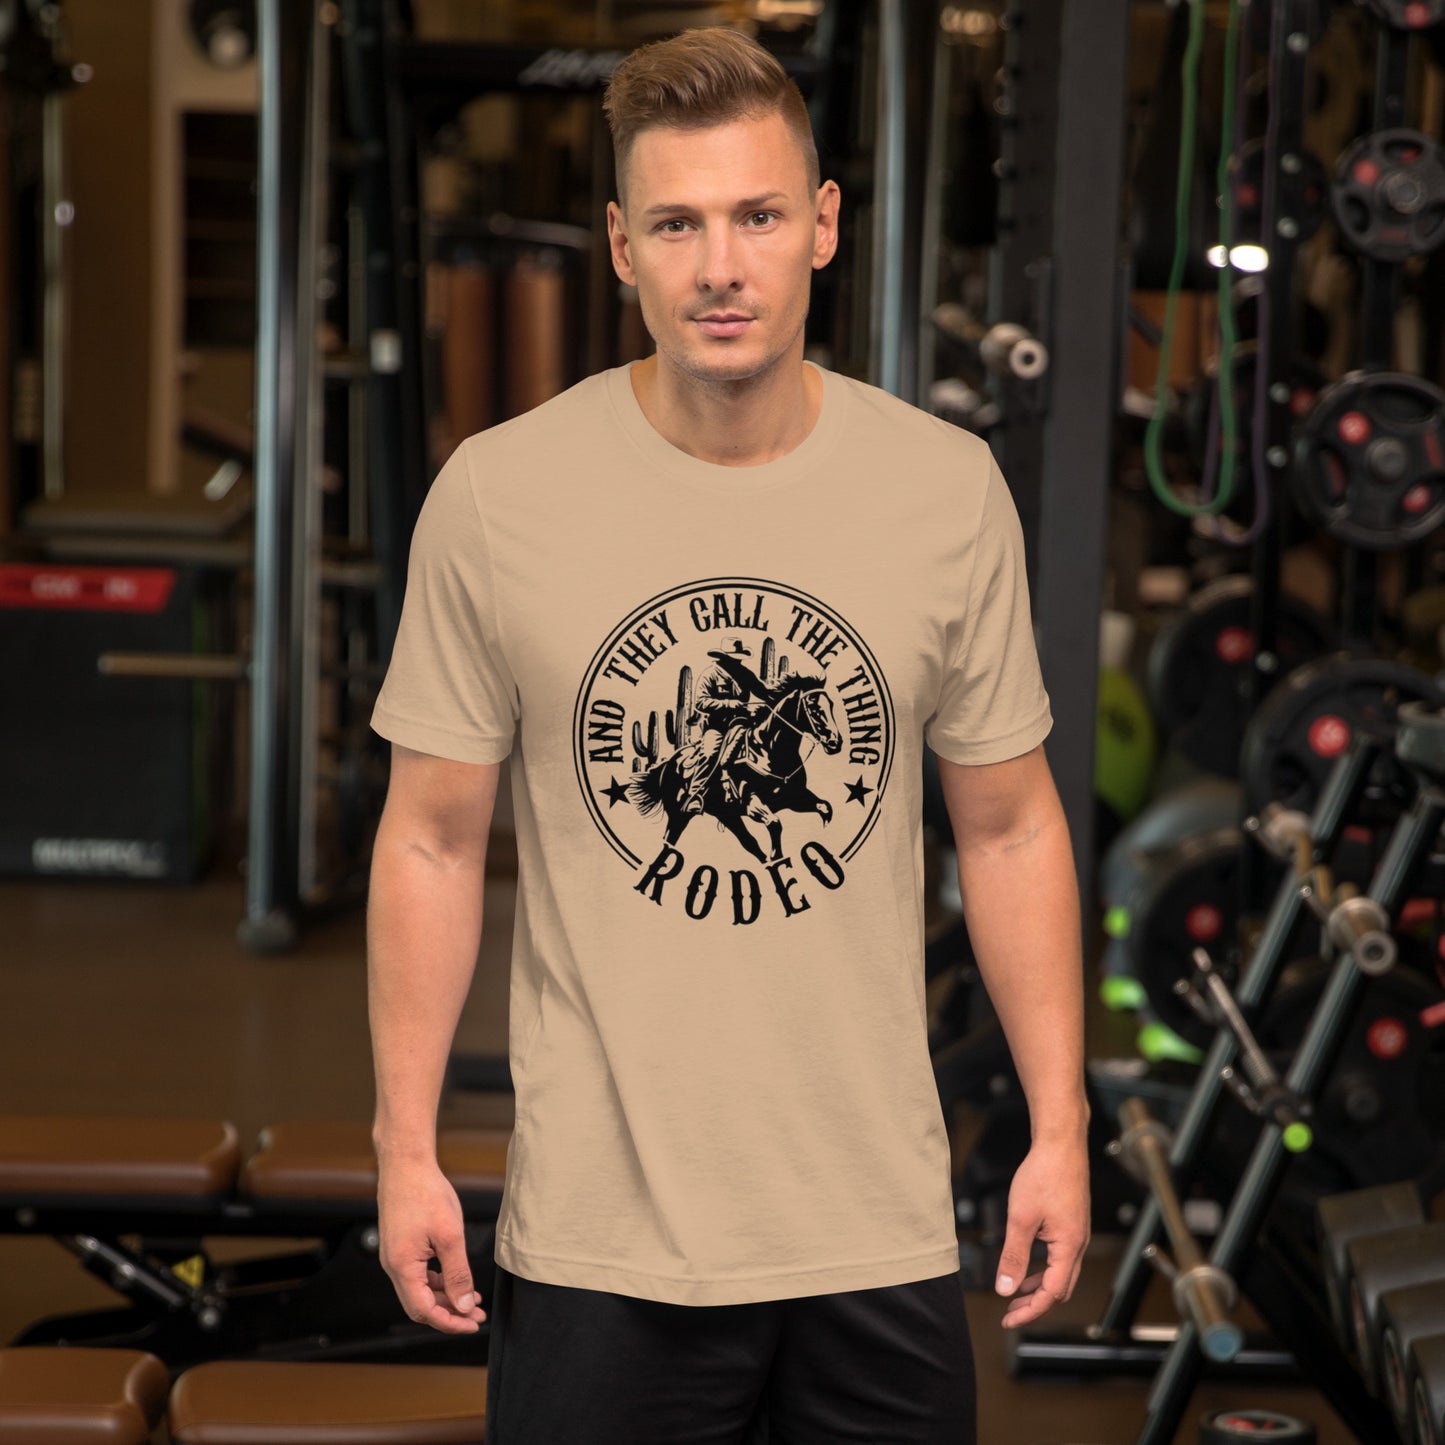 And They Call It Rodeo - Get Your Twang On with Classic Country Tees - The Ultimate Unisex T-Shirt for True Country Souls! - Classic Country Tees